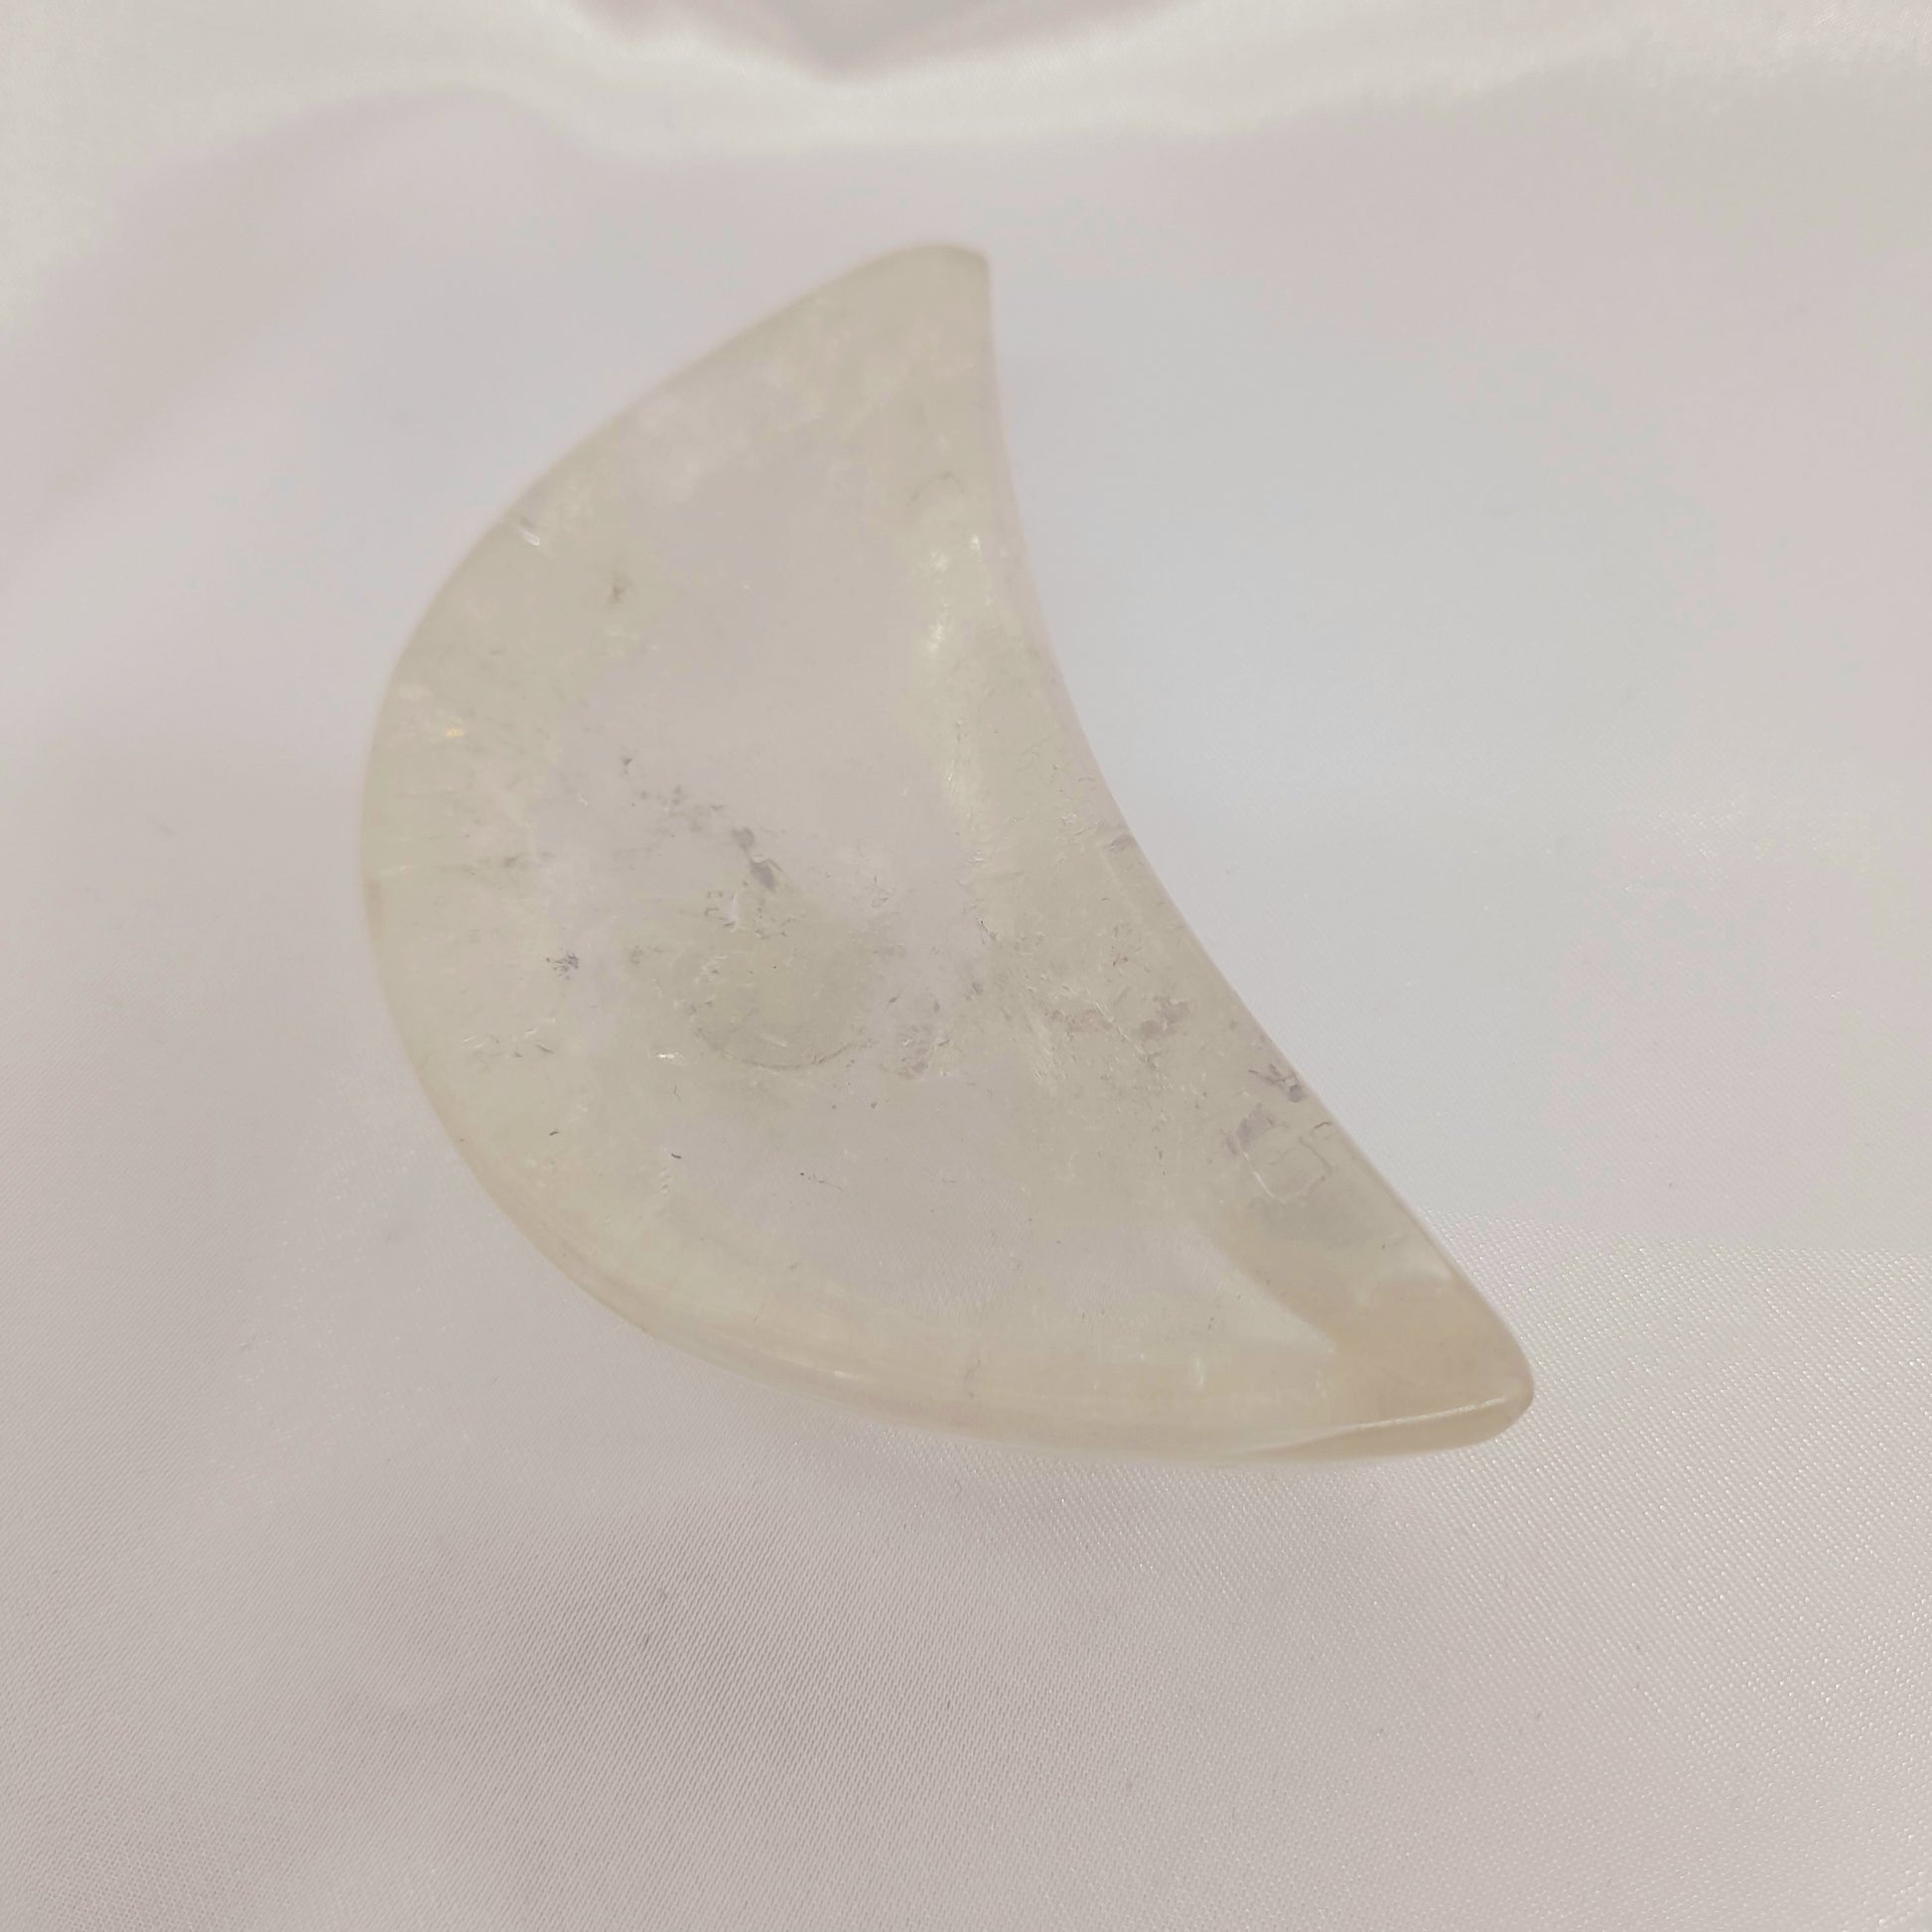 Hand-Carved Clear Quartz Moon Bowl - Master Healer and Amplifier Crystal - Spiritual and Magical Healing - Enhances Personal and Crystal Abilities - Exquisite and Unique Clear Quartz Piece.